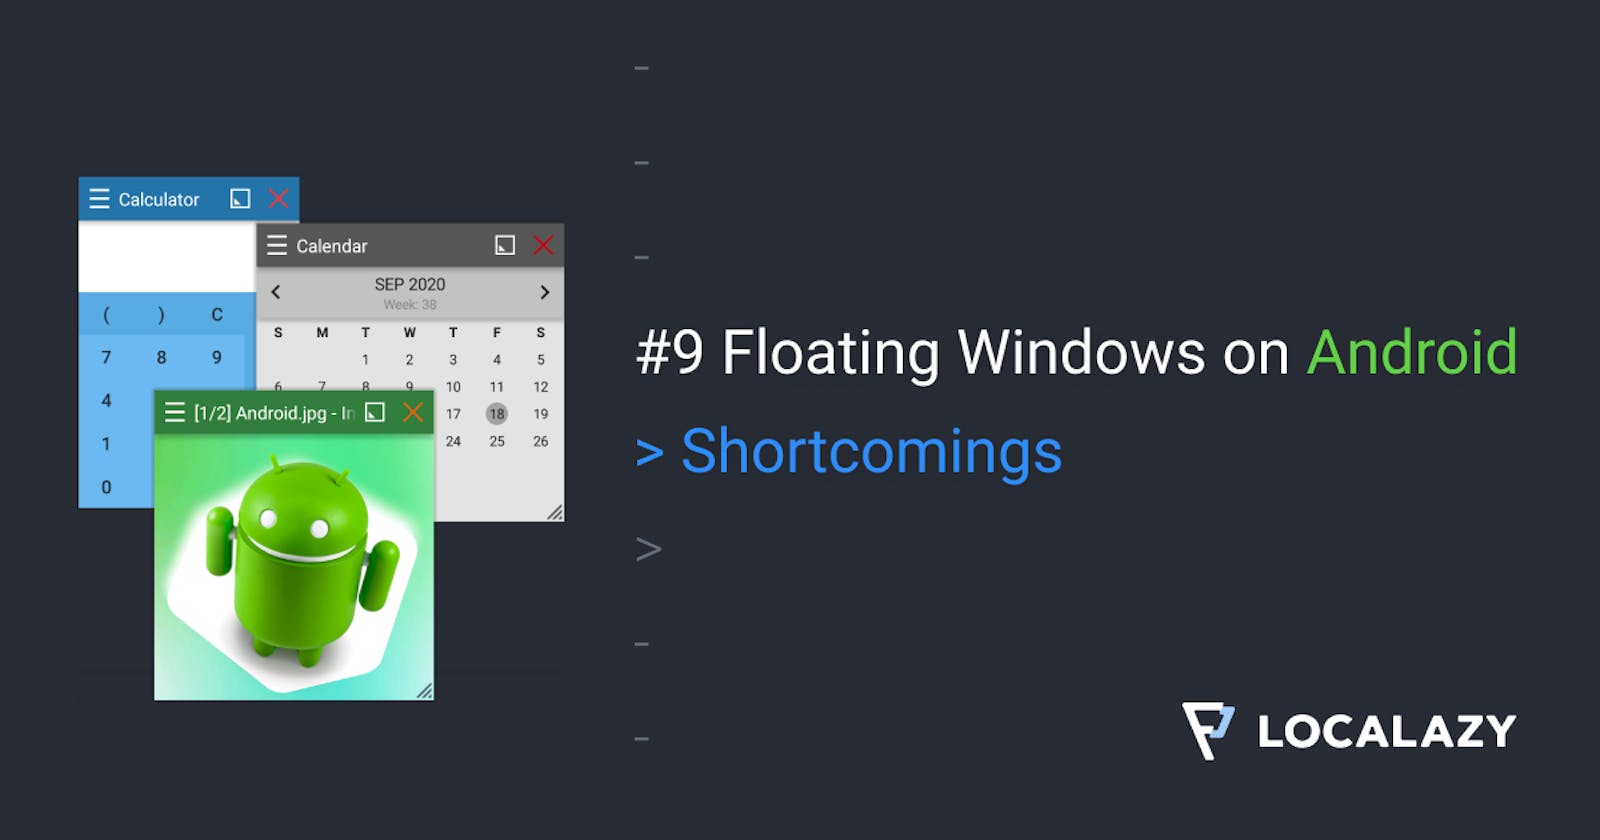 Shortcomings of floating windows on Android